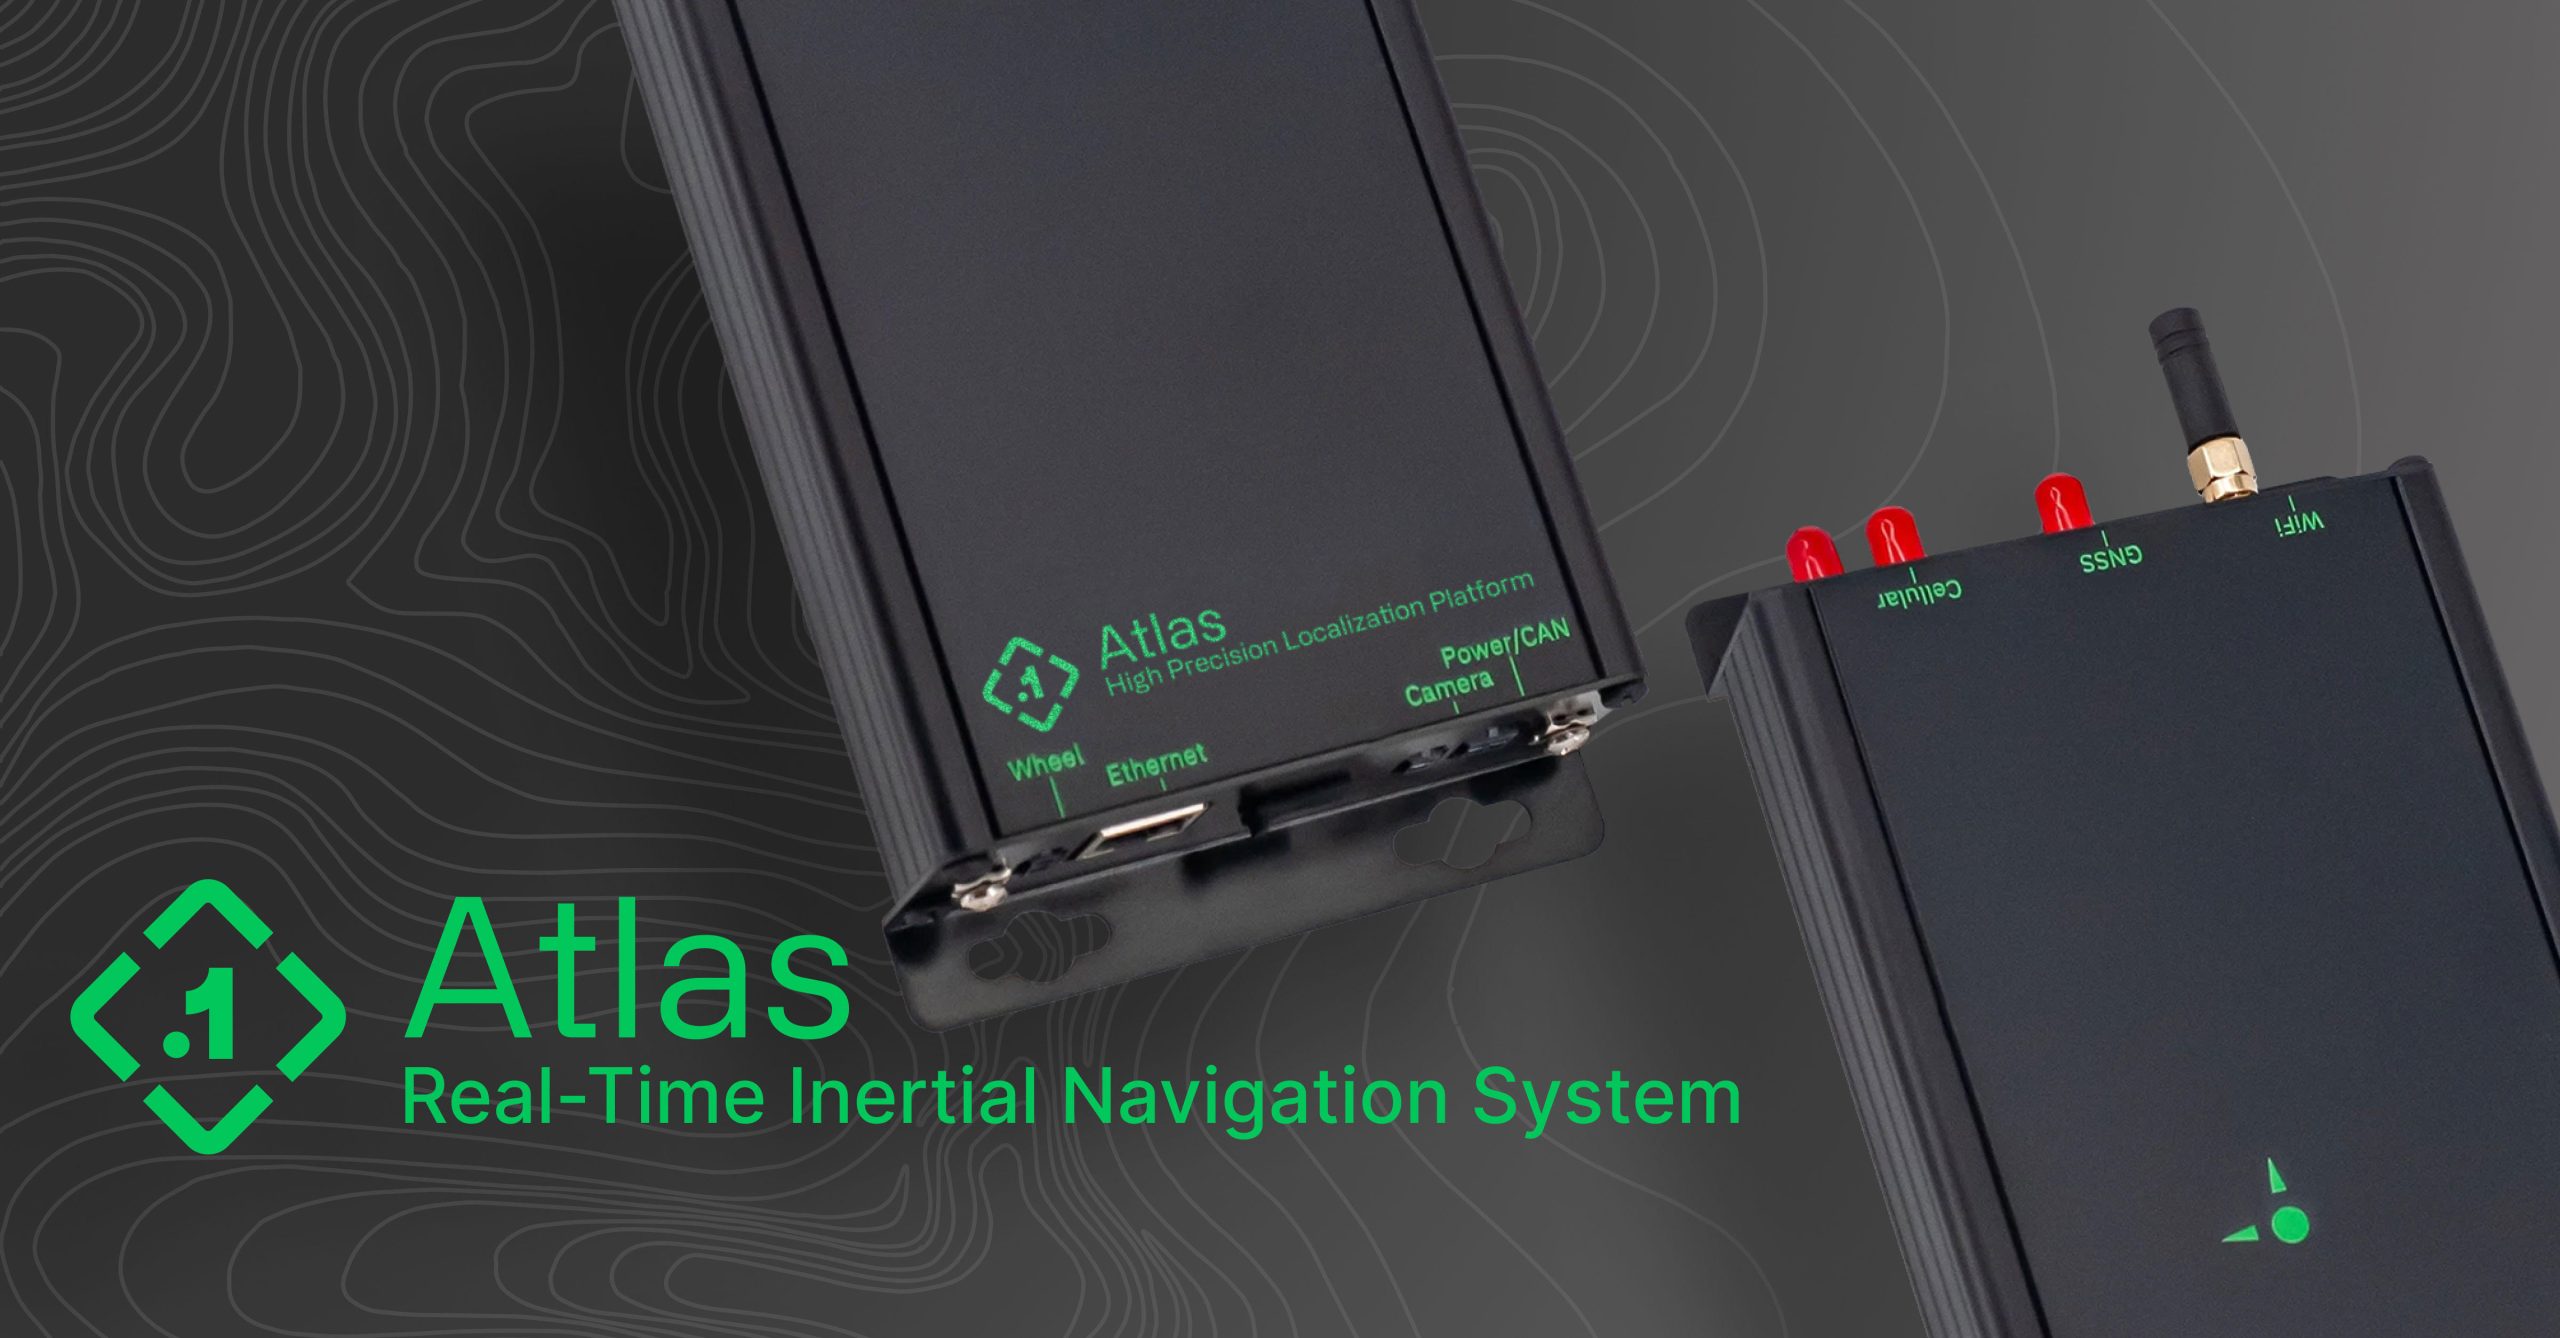 Point one unveils Atlas real-time inertial navigation system